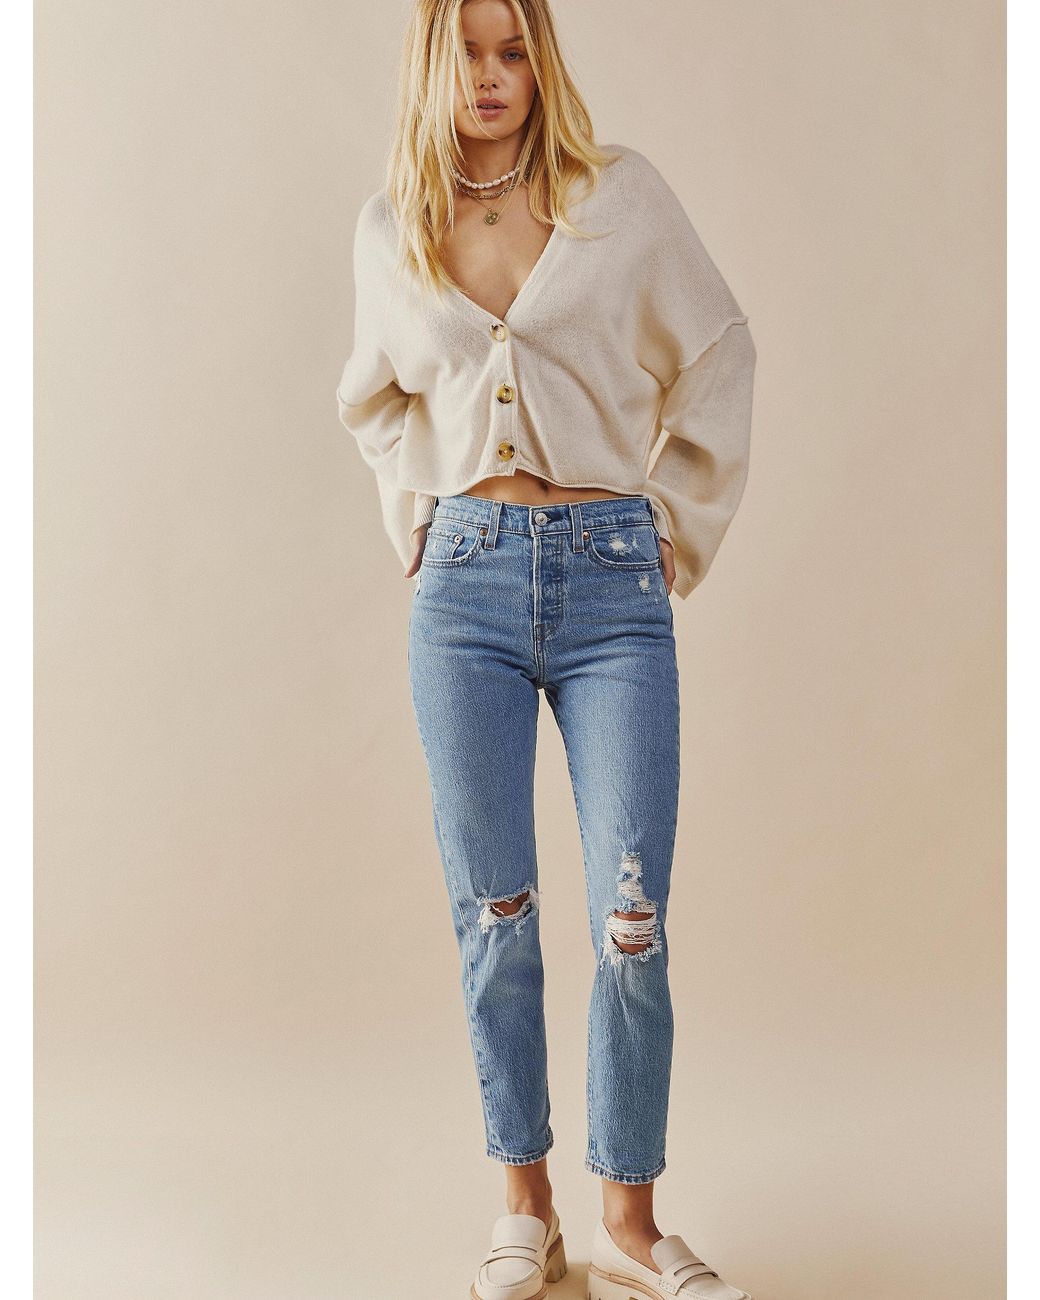 Free People Levi's Wedgie Icon High-rise Jeans in Blue | Lyst